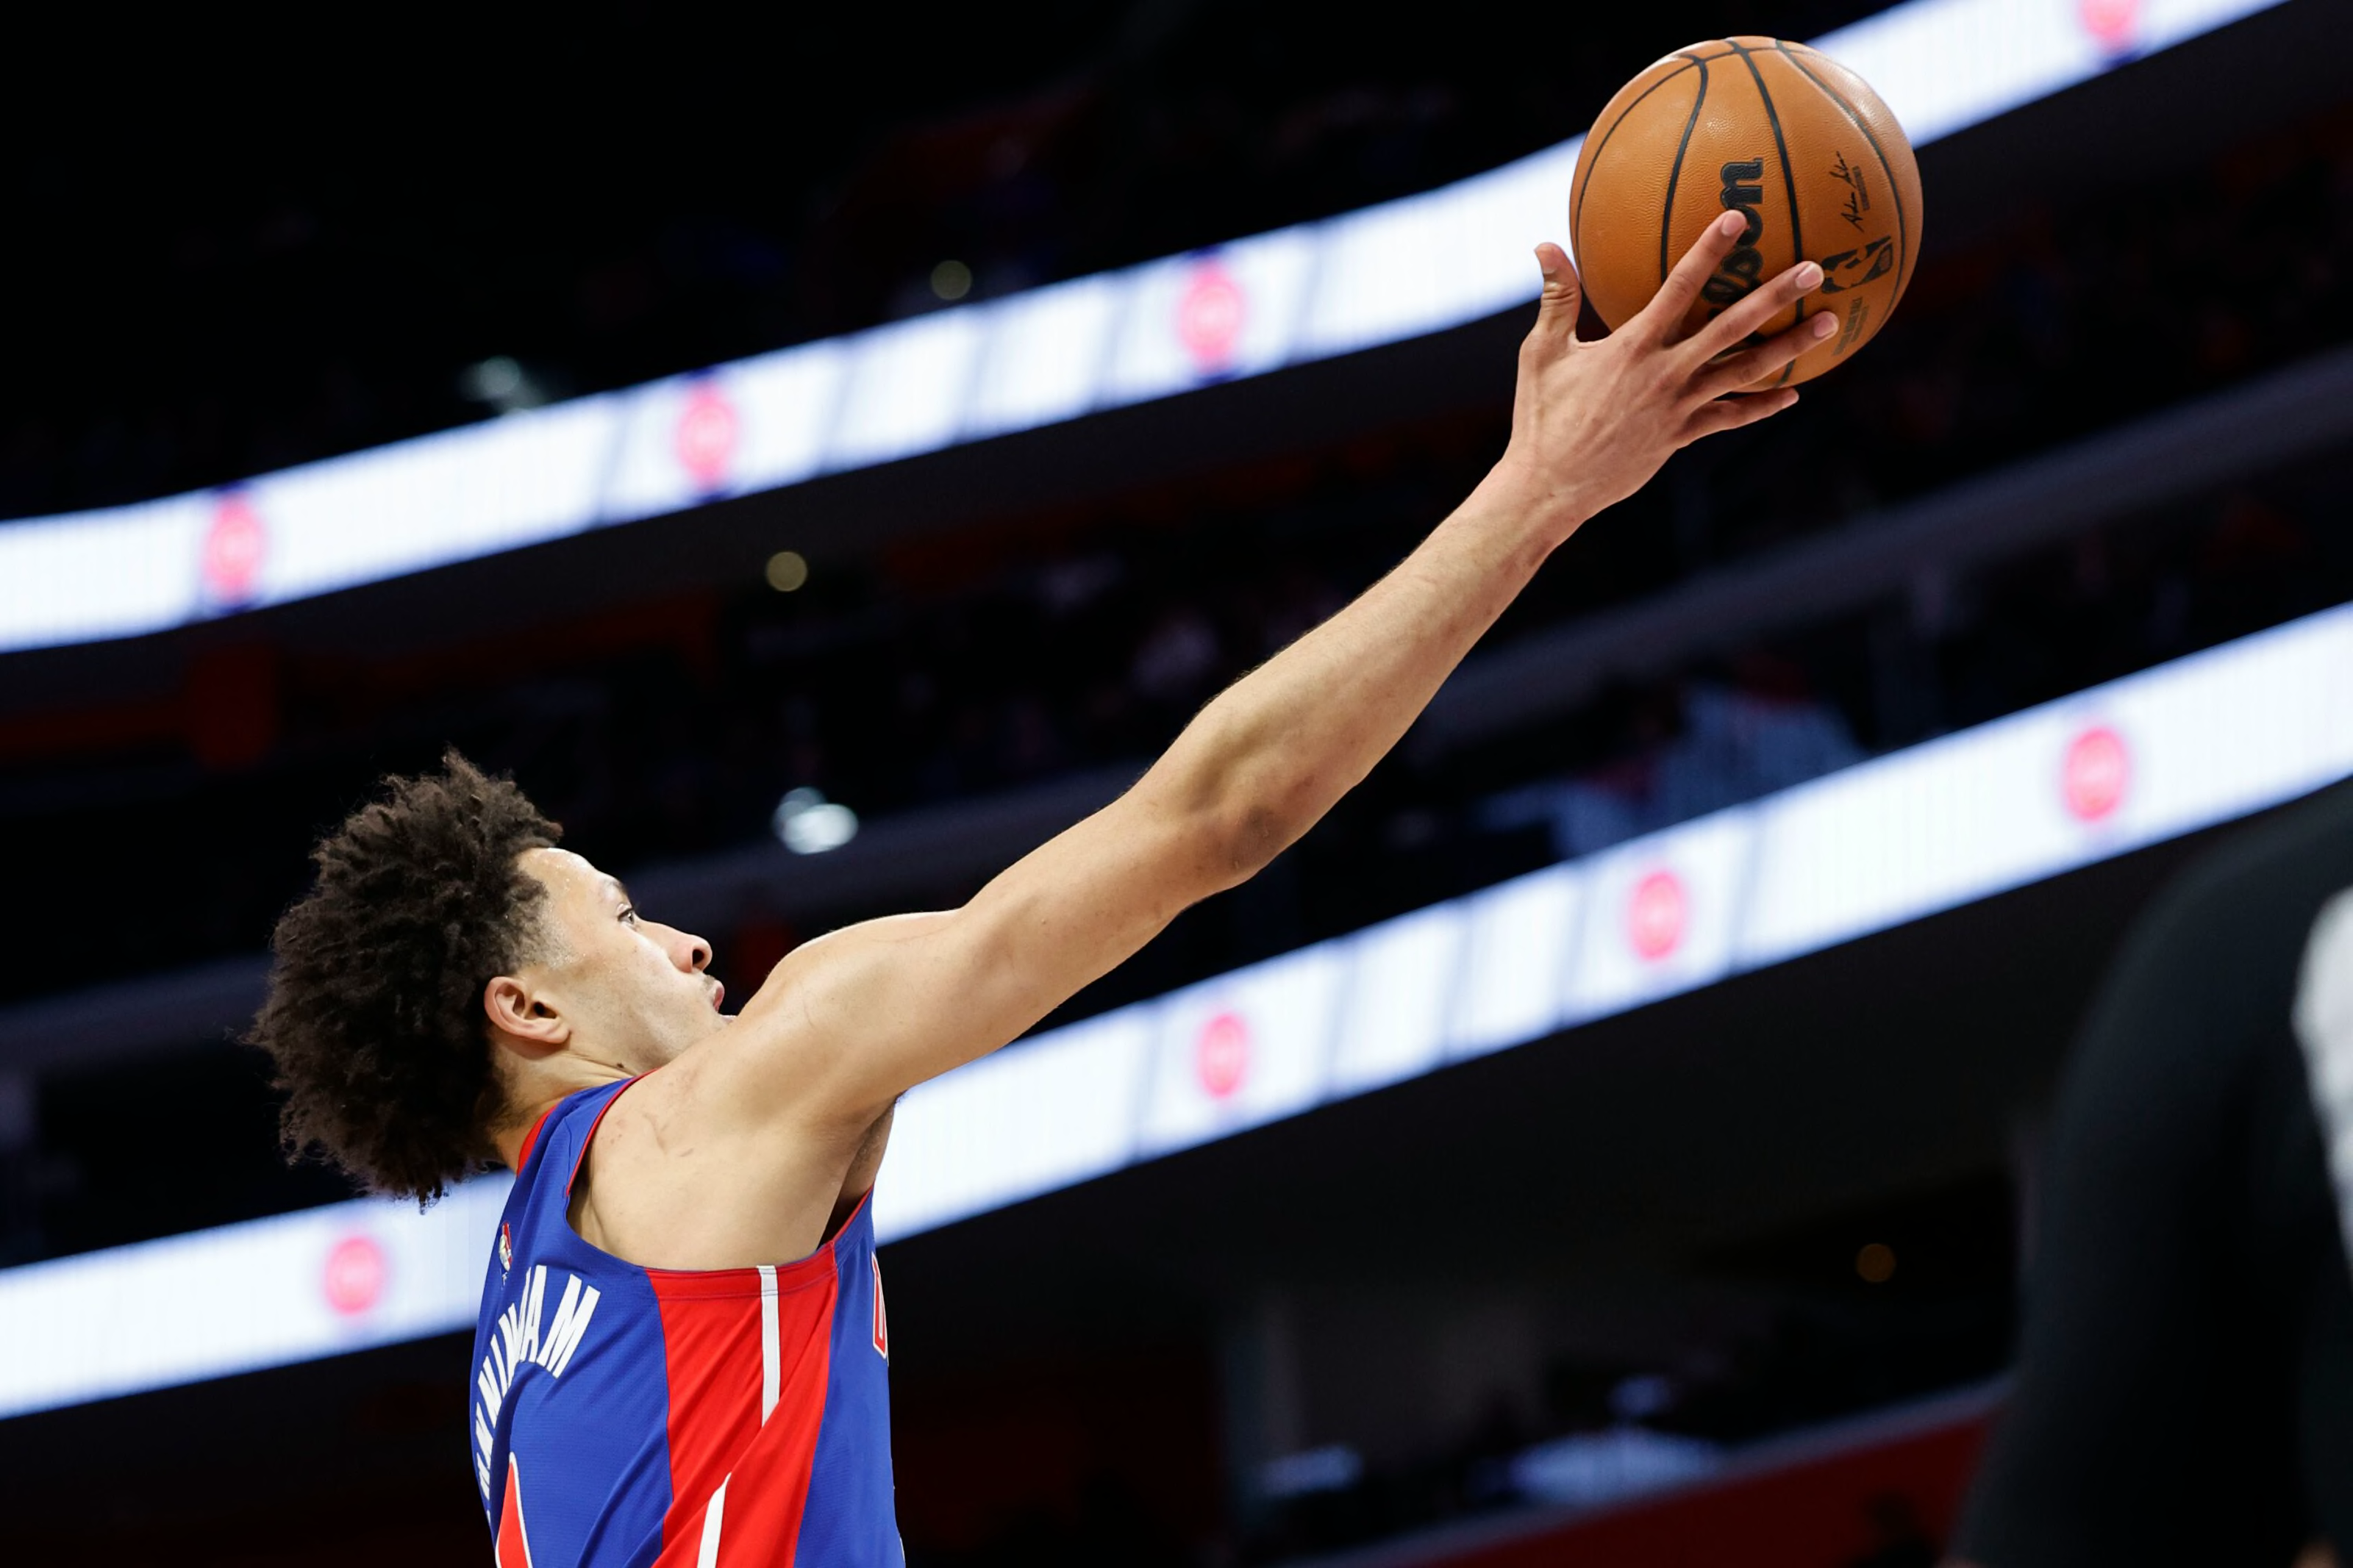 Pistons open practice Cade, Killian and hints at a starting lineup